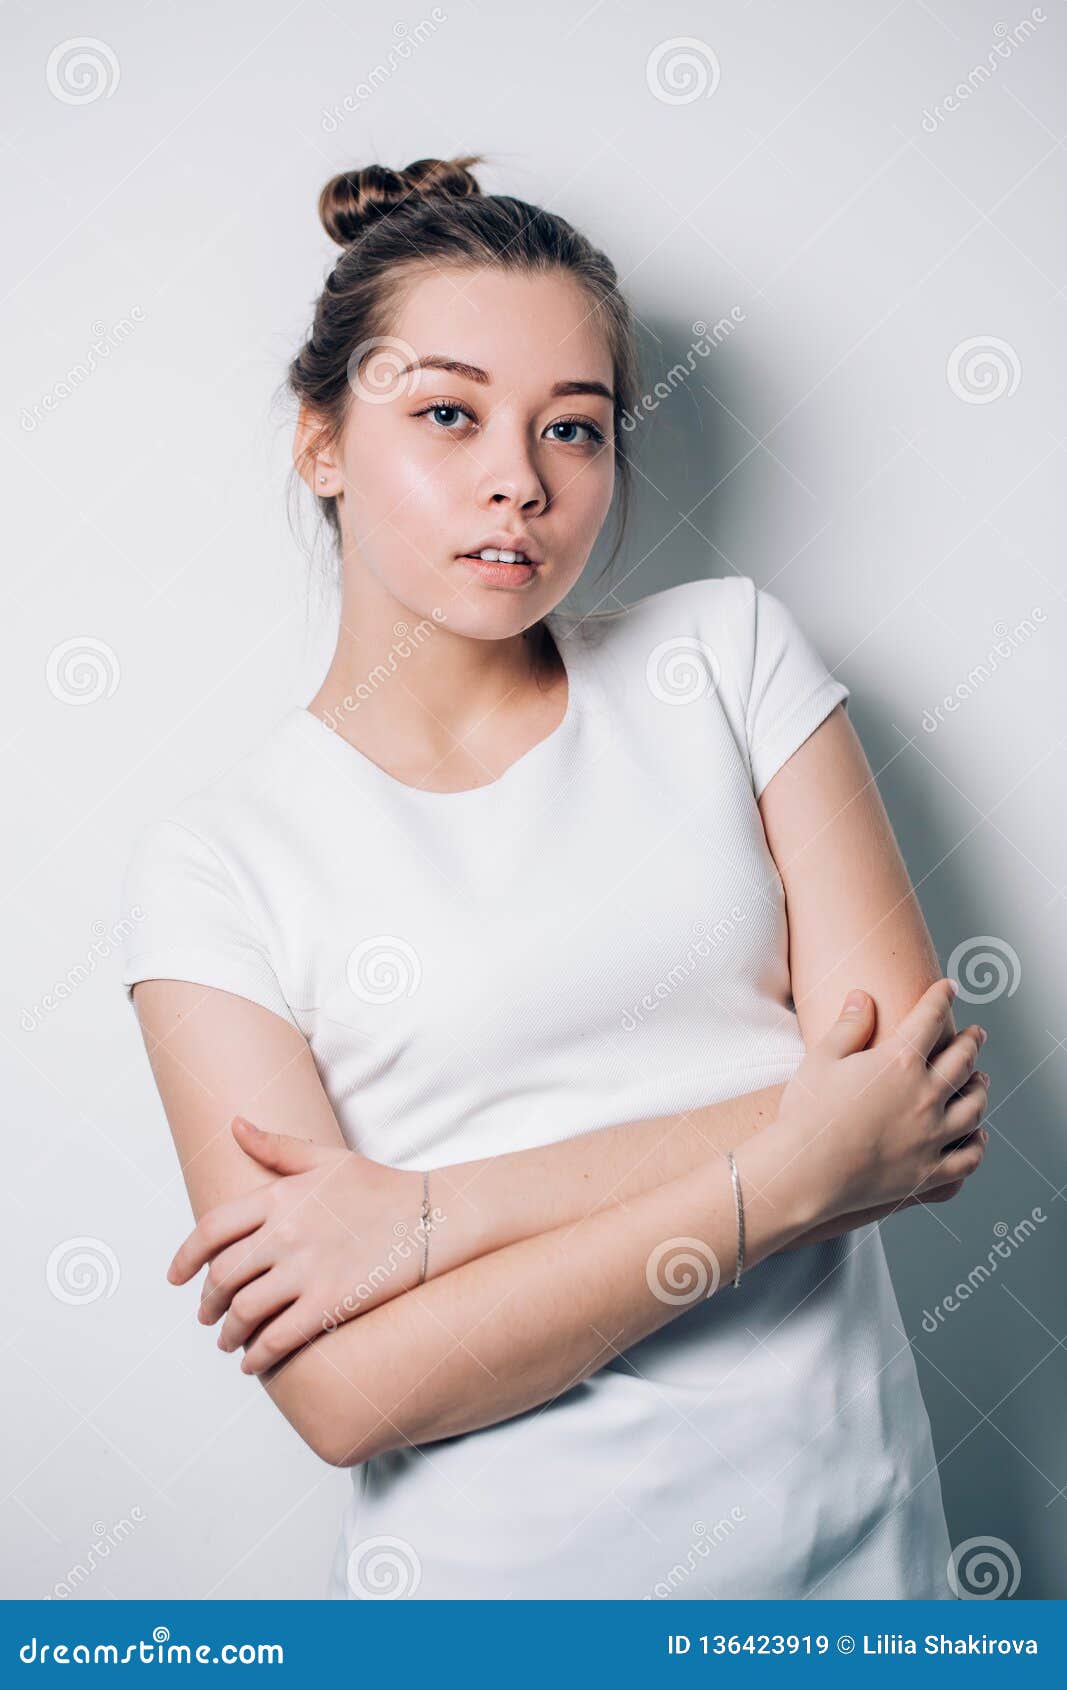 Portrait Of A Fashionable Young Woman On A White Stock Image - Image of